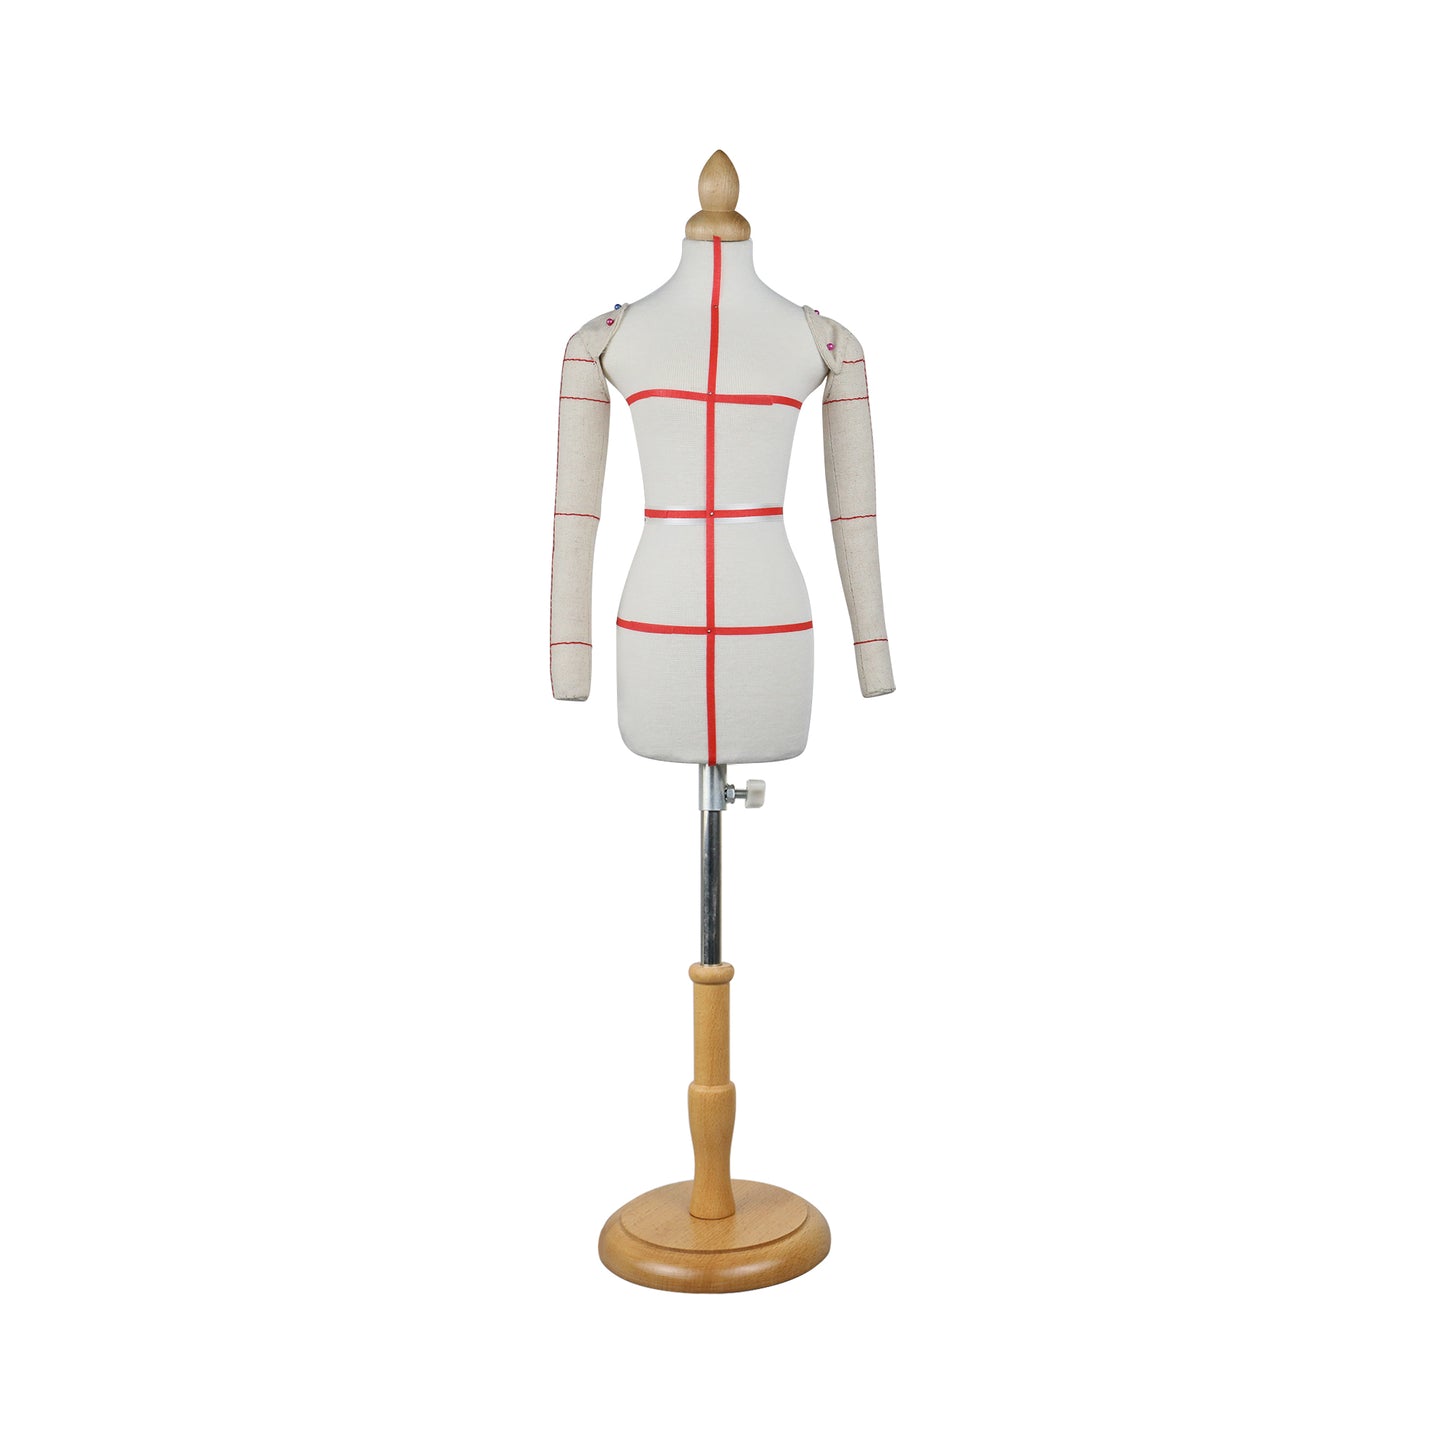 DE-LIANG Female Fully Pinnable Tailor Soft Arms, 1:3 Mini Arm Not Human Size,Dress Form Dummy's Cotton Sewing Arms,Arms for Pattern Scale Arms 20 cm